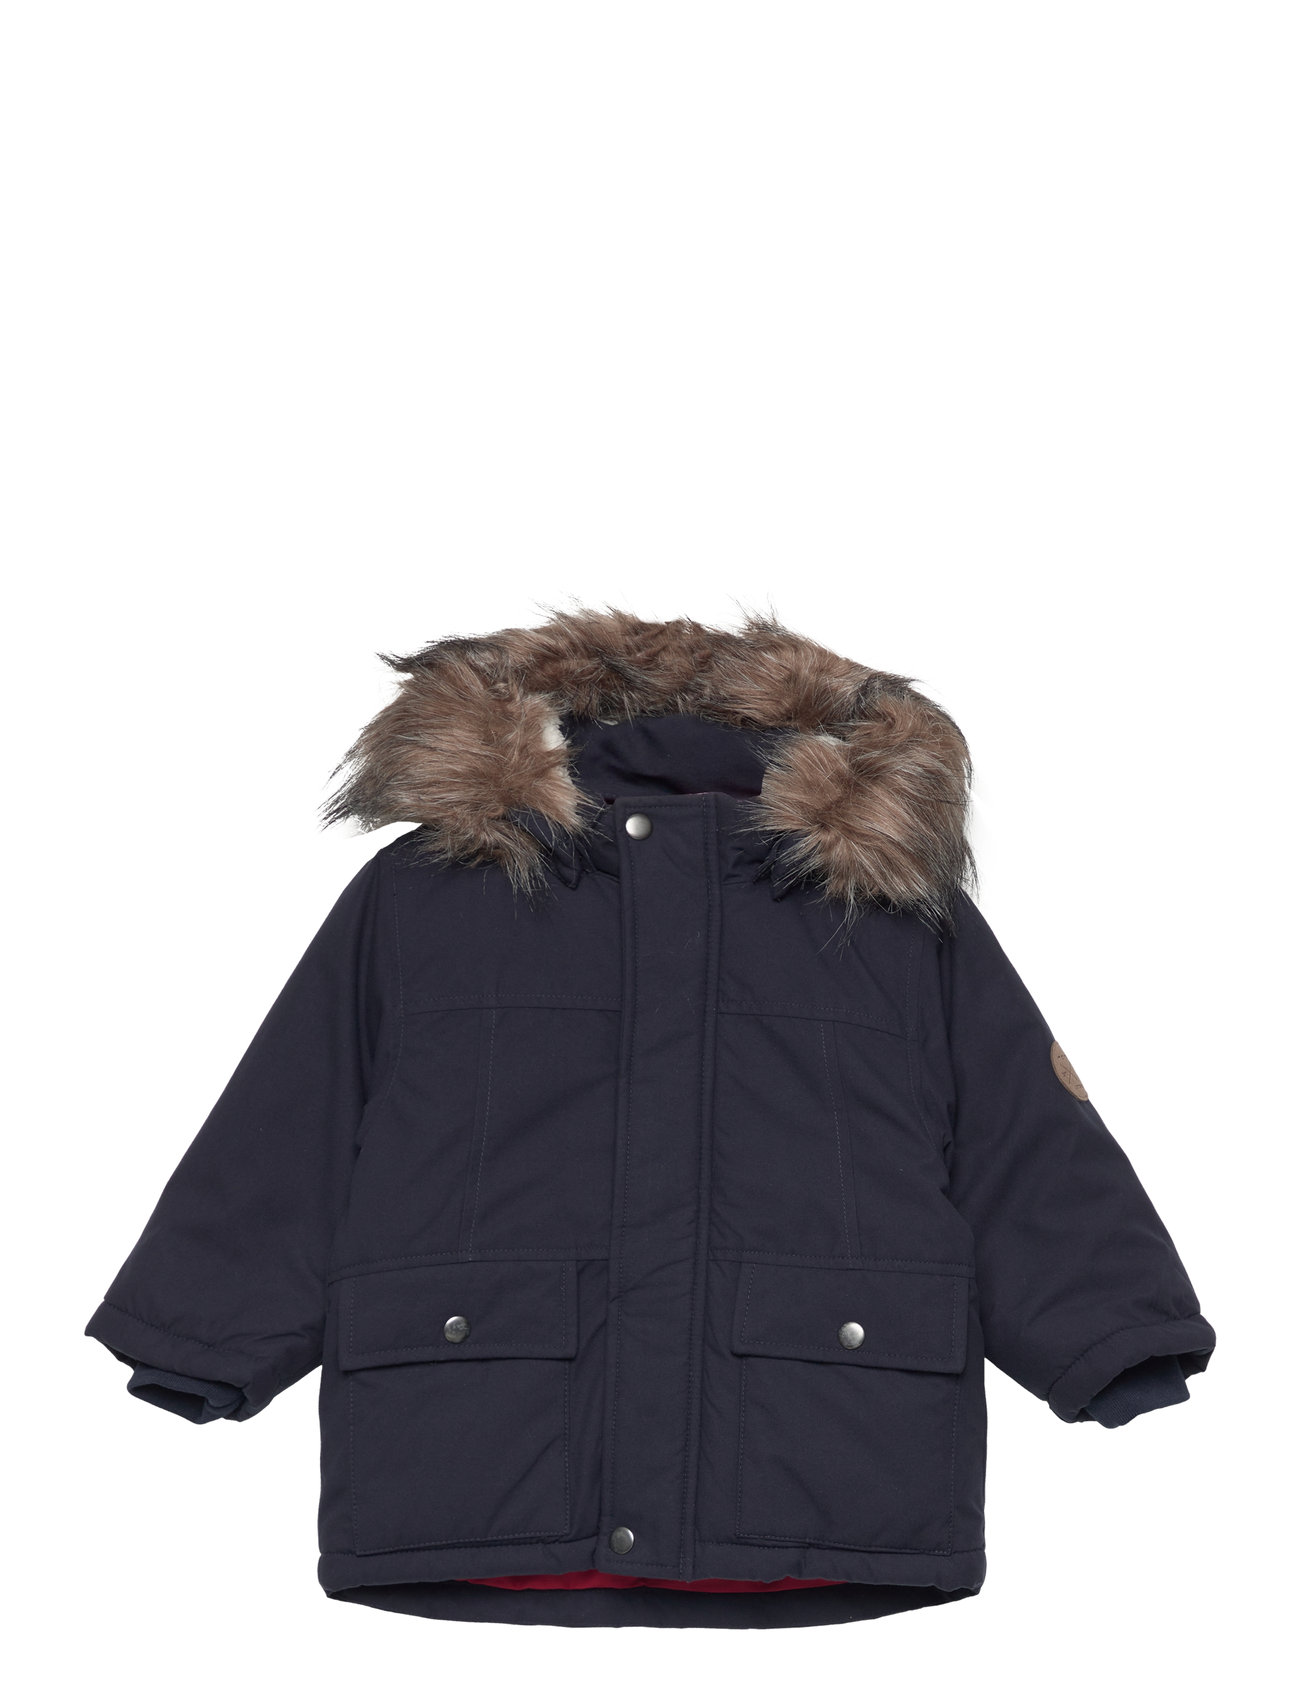 Parkas Parka it 27.50 Fo Boozt.com. Nmmmarlin online Pb delivery Jacket returns Buy easy name €. name it from - and at Fast